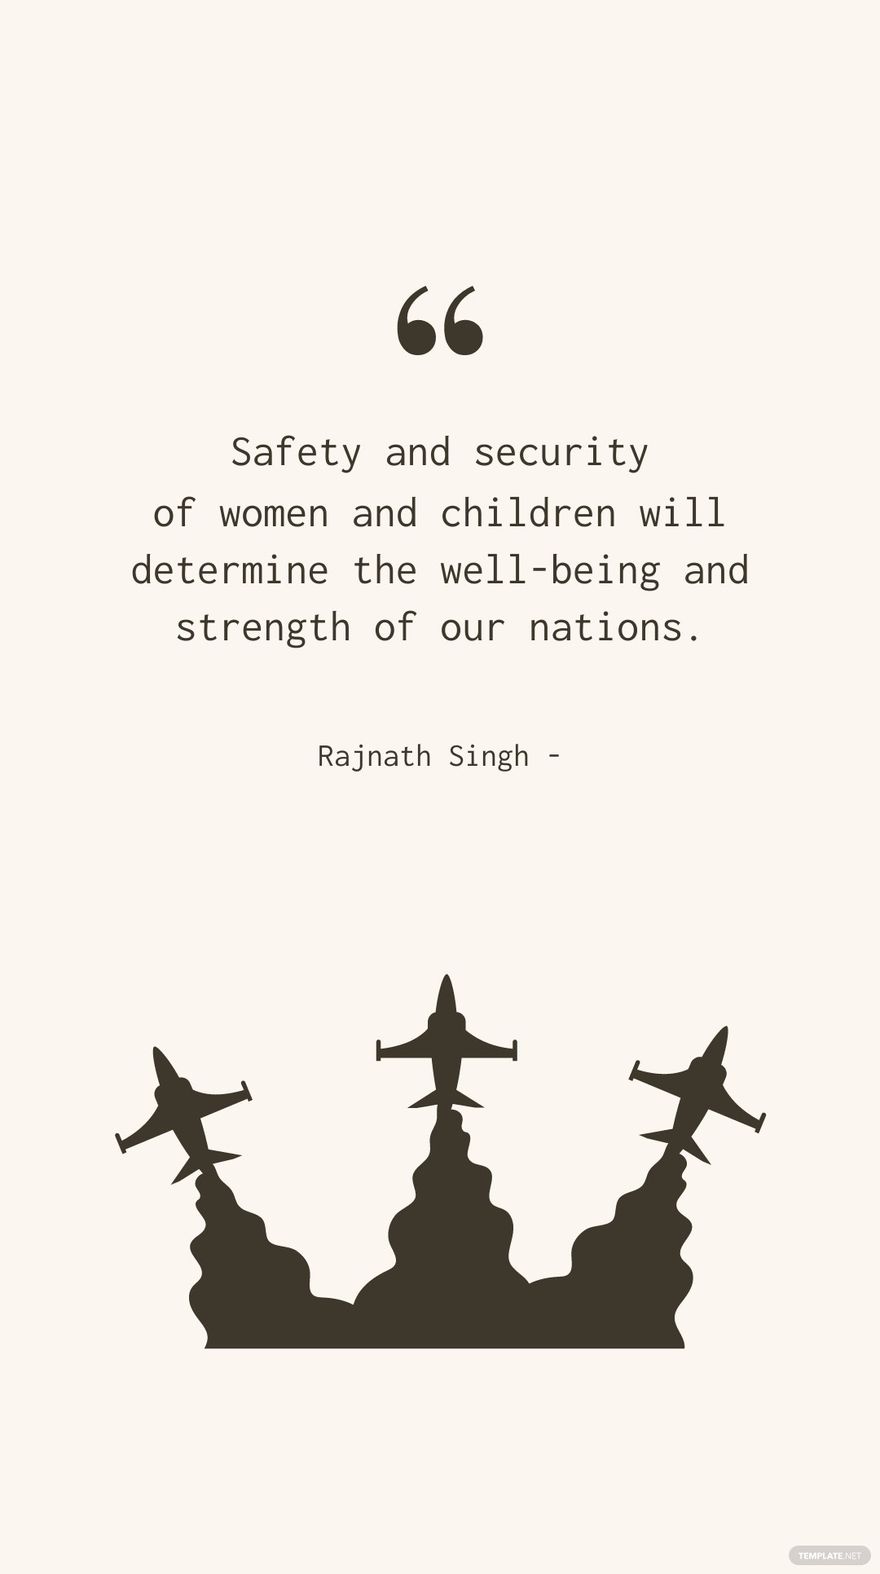 Rajnath Singh - Safety and security of women and children will determine the well-being and strength of our nations. in JPG